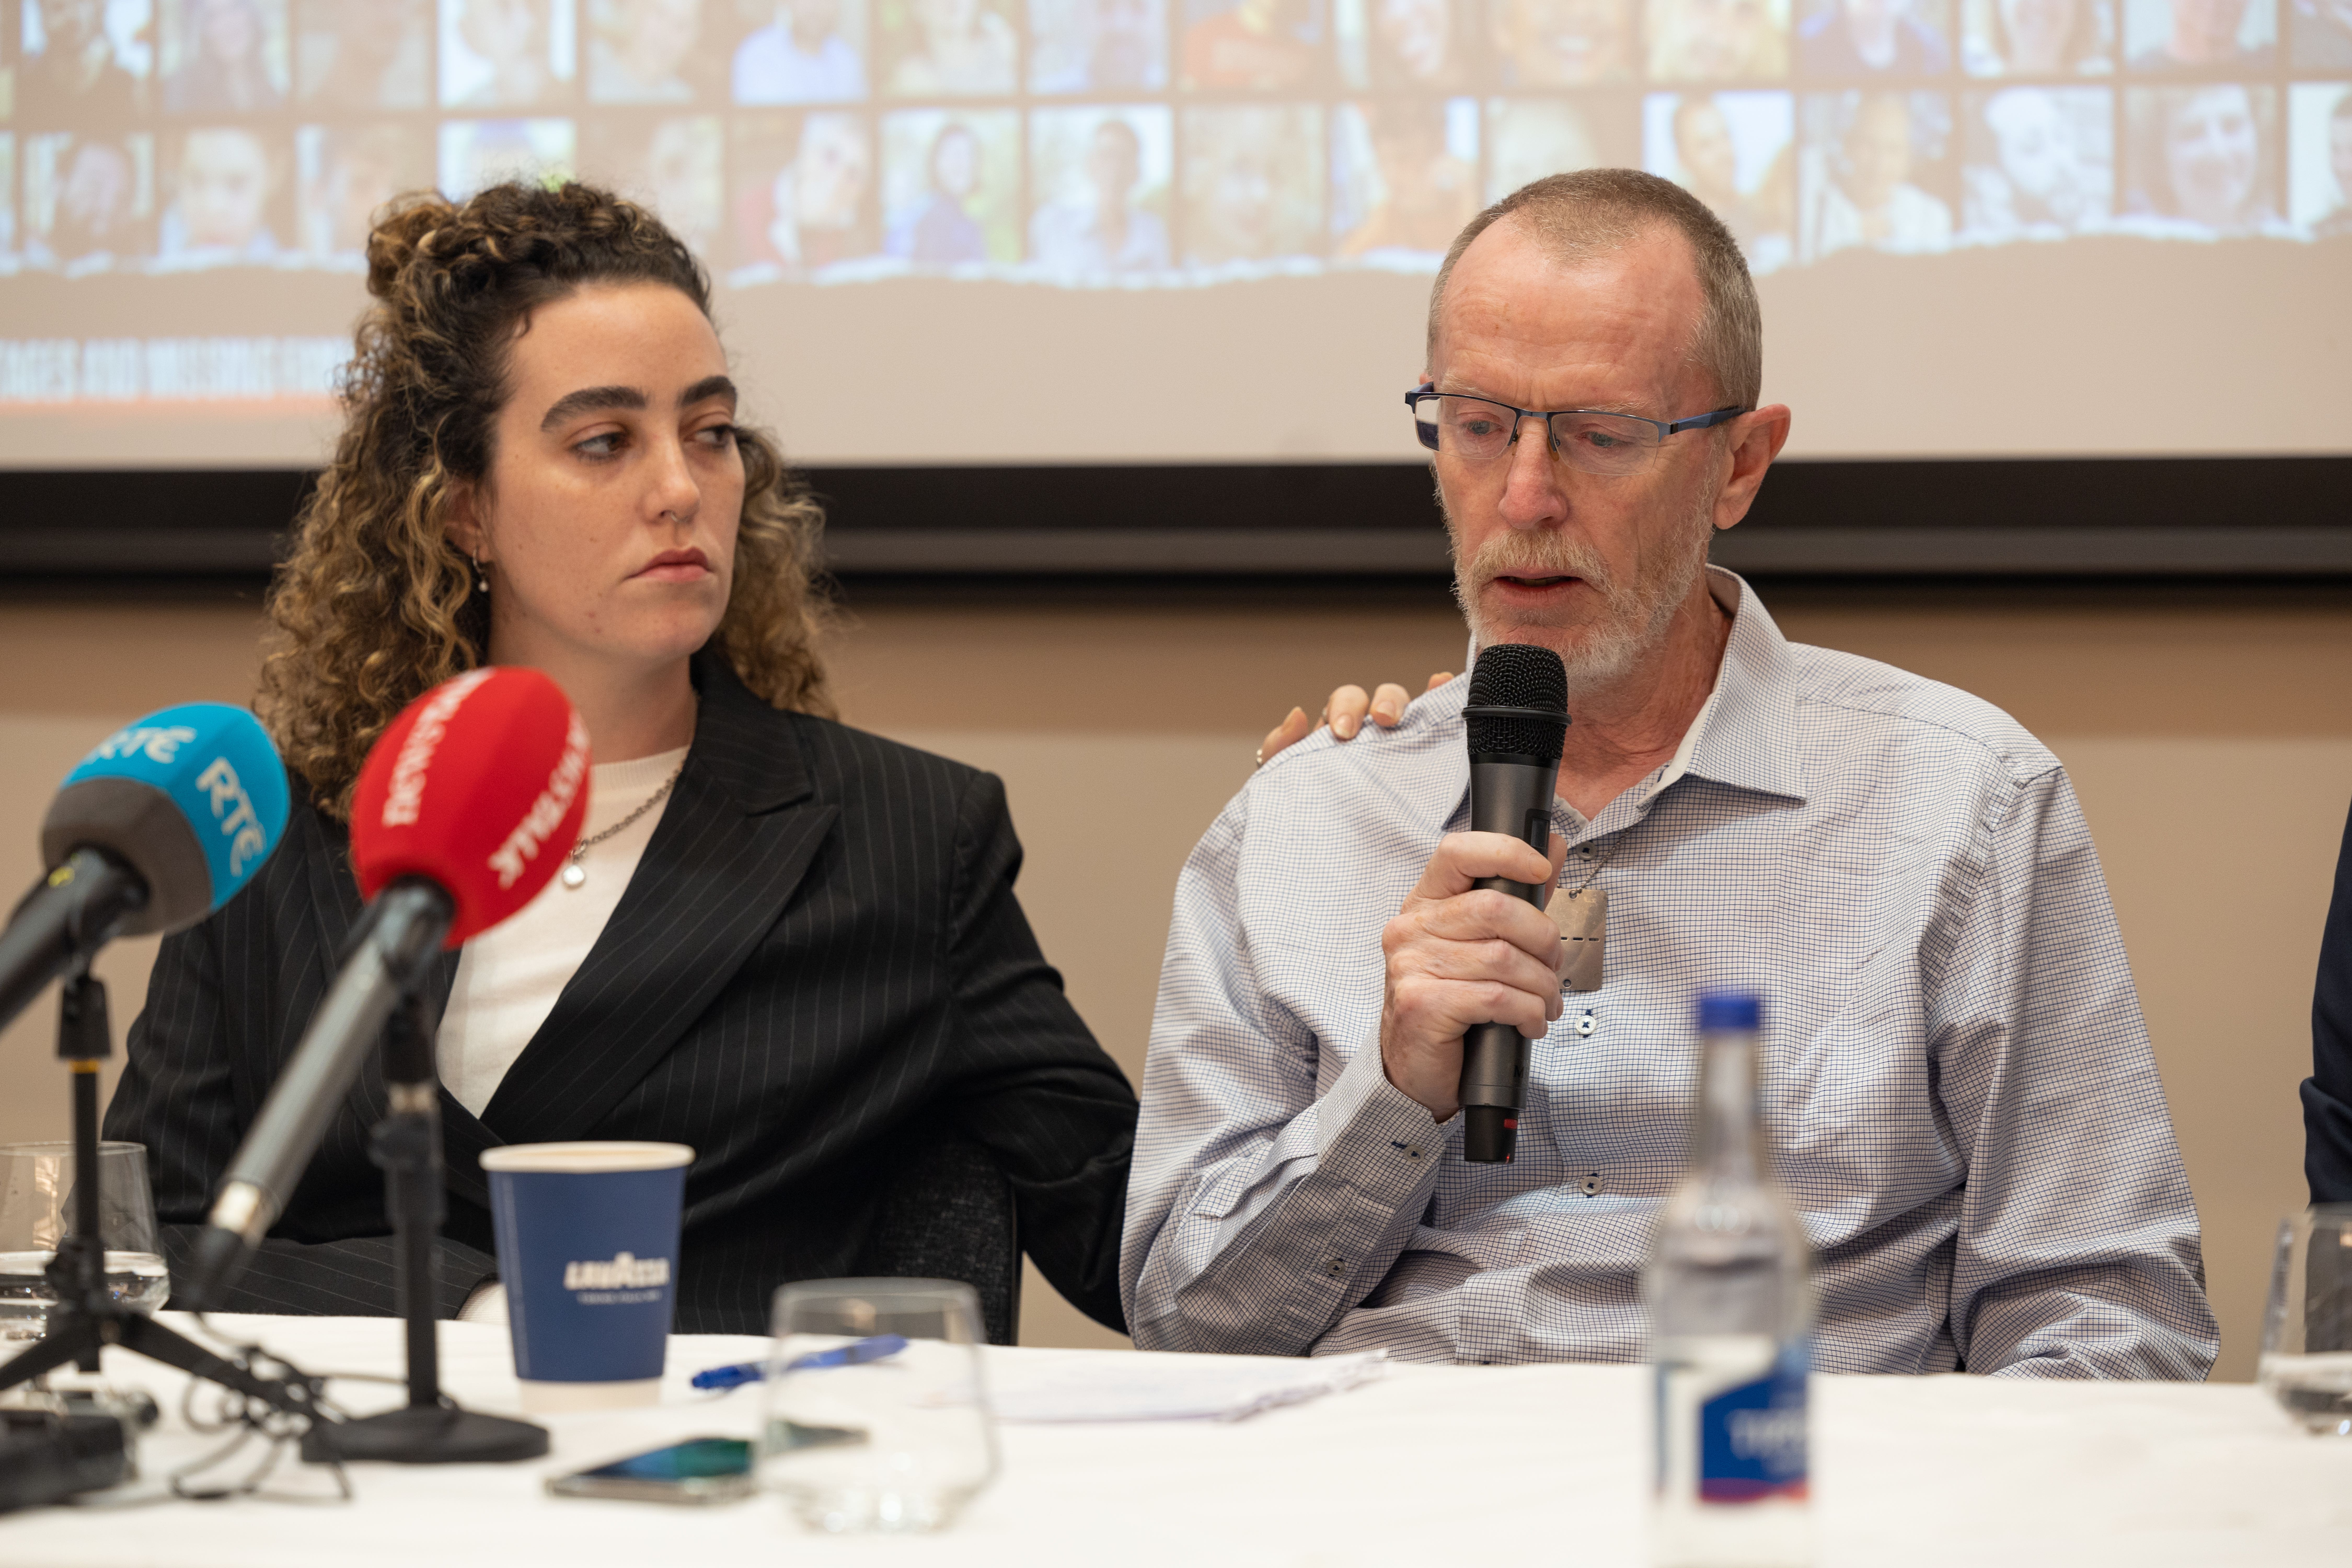 Thomas Hand and Natali Hand during a press conference for families of hostages feared taken in Gaza at the Embassy of Israel in Dublin (PA)